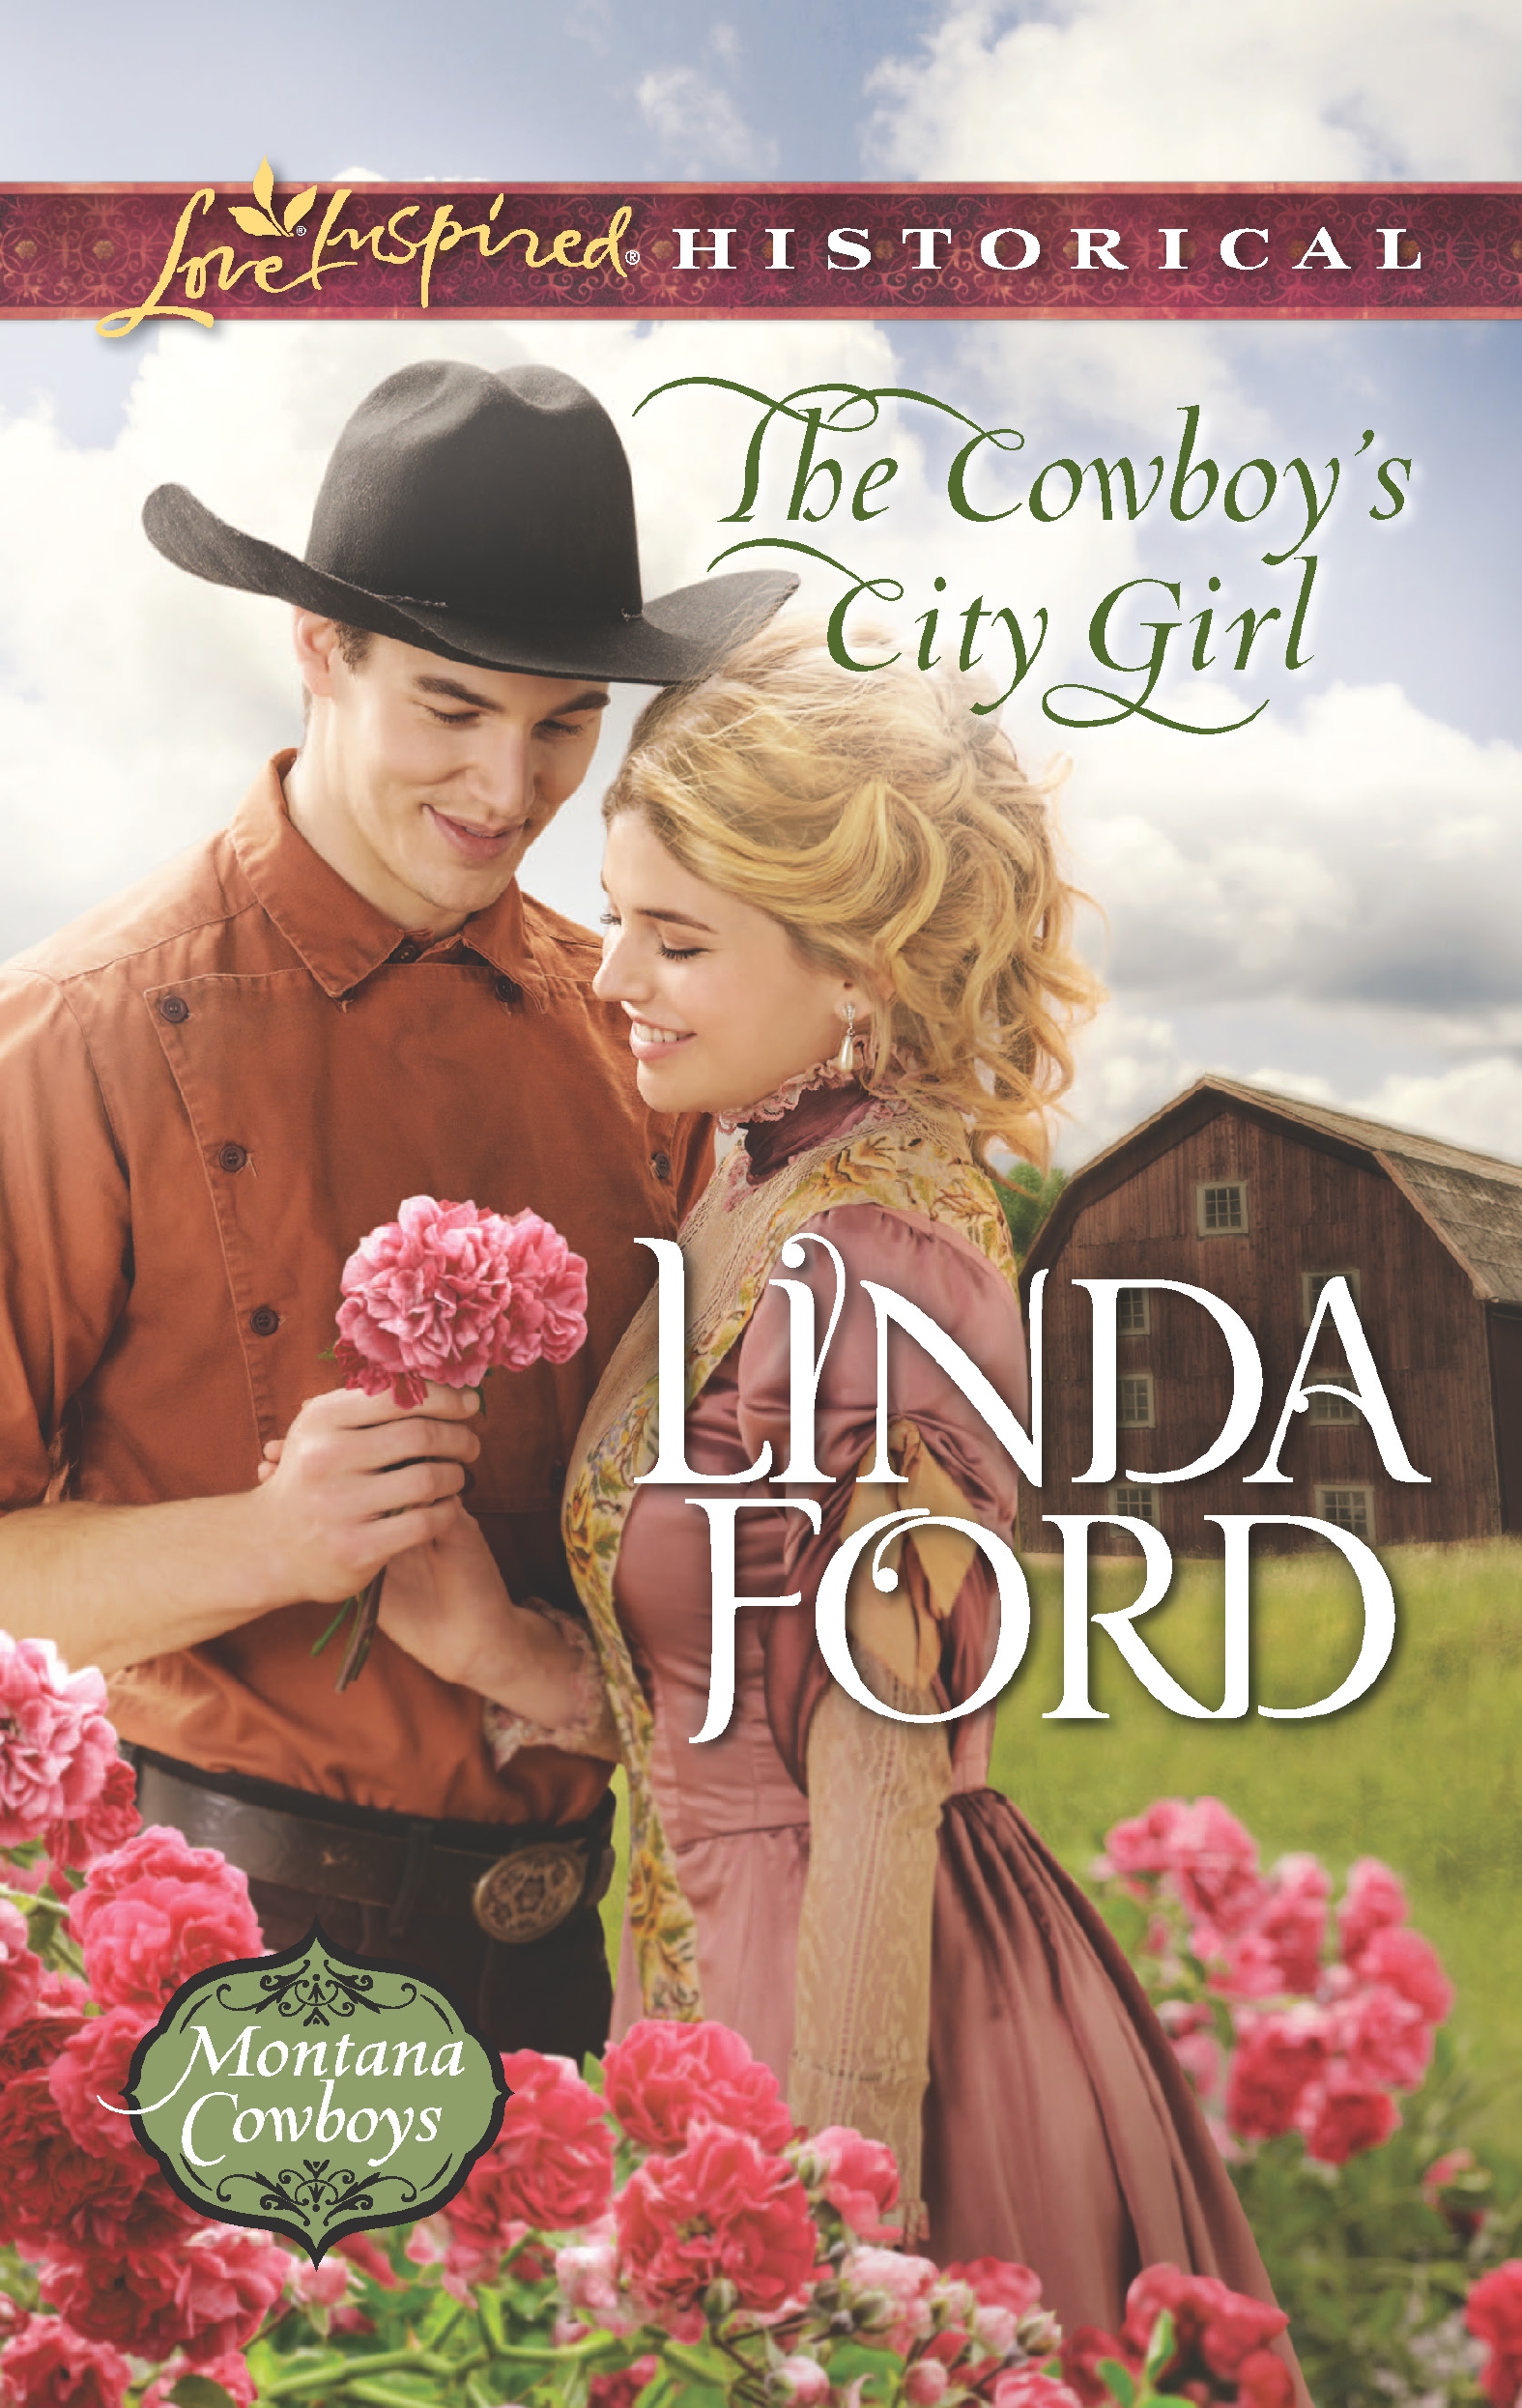 The Cowboy's City Girl (2016) by Linda Ford